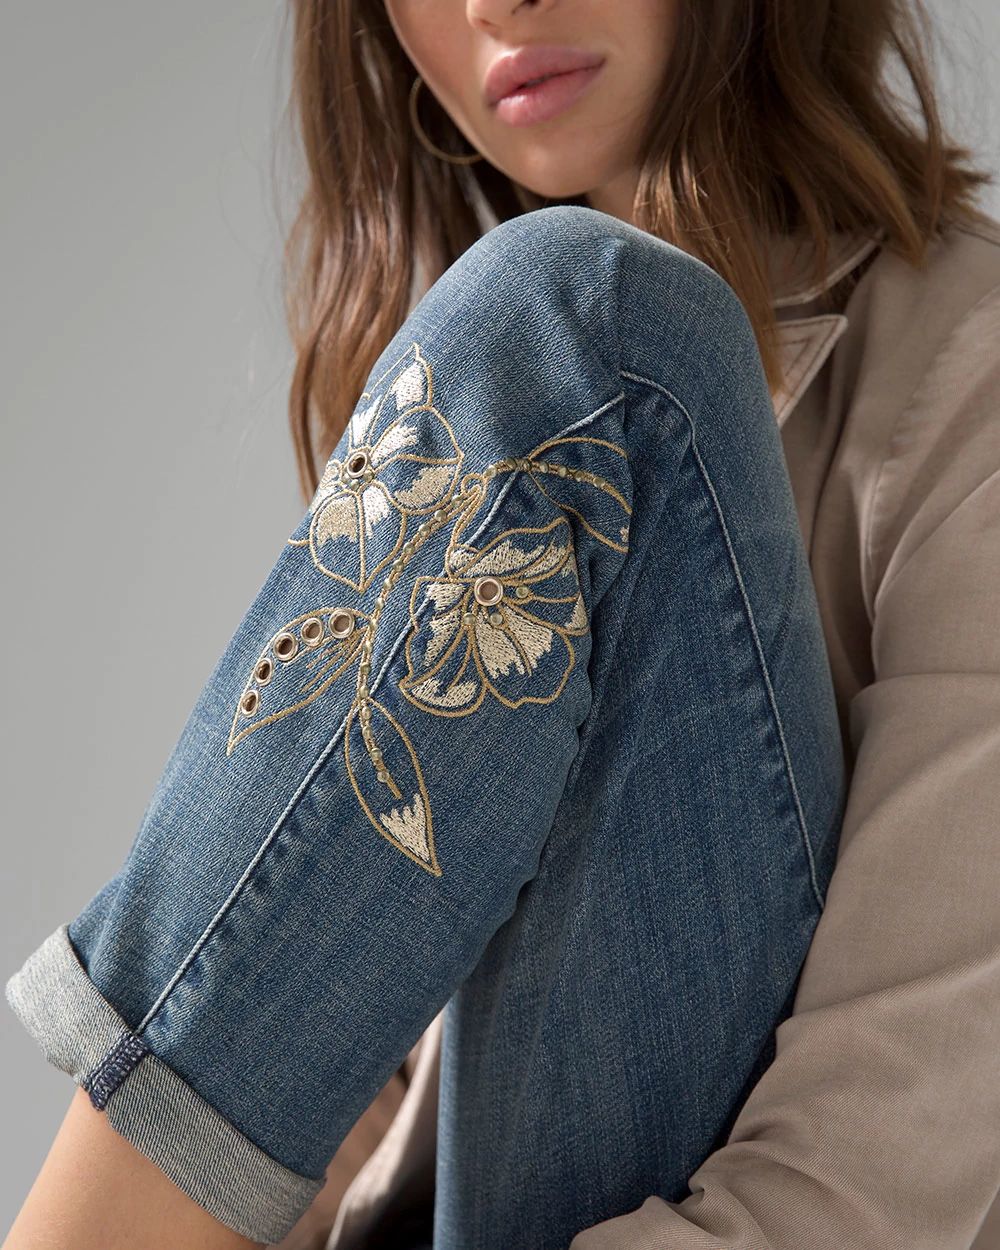 Mid-Rise Everyday Soft Denim™ Floral Grommet Girlfriend Jeans click to view larger image.